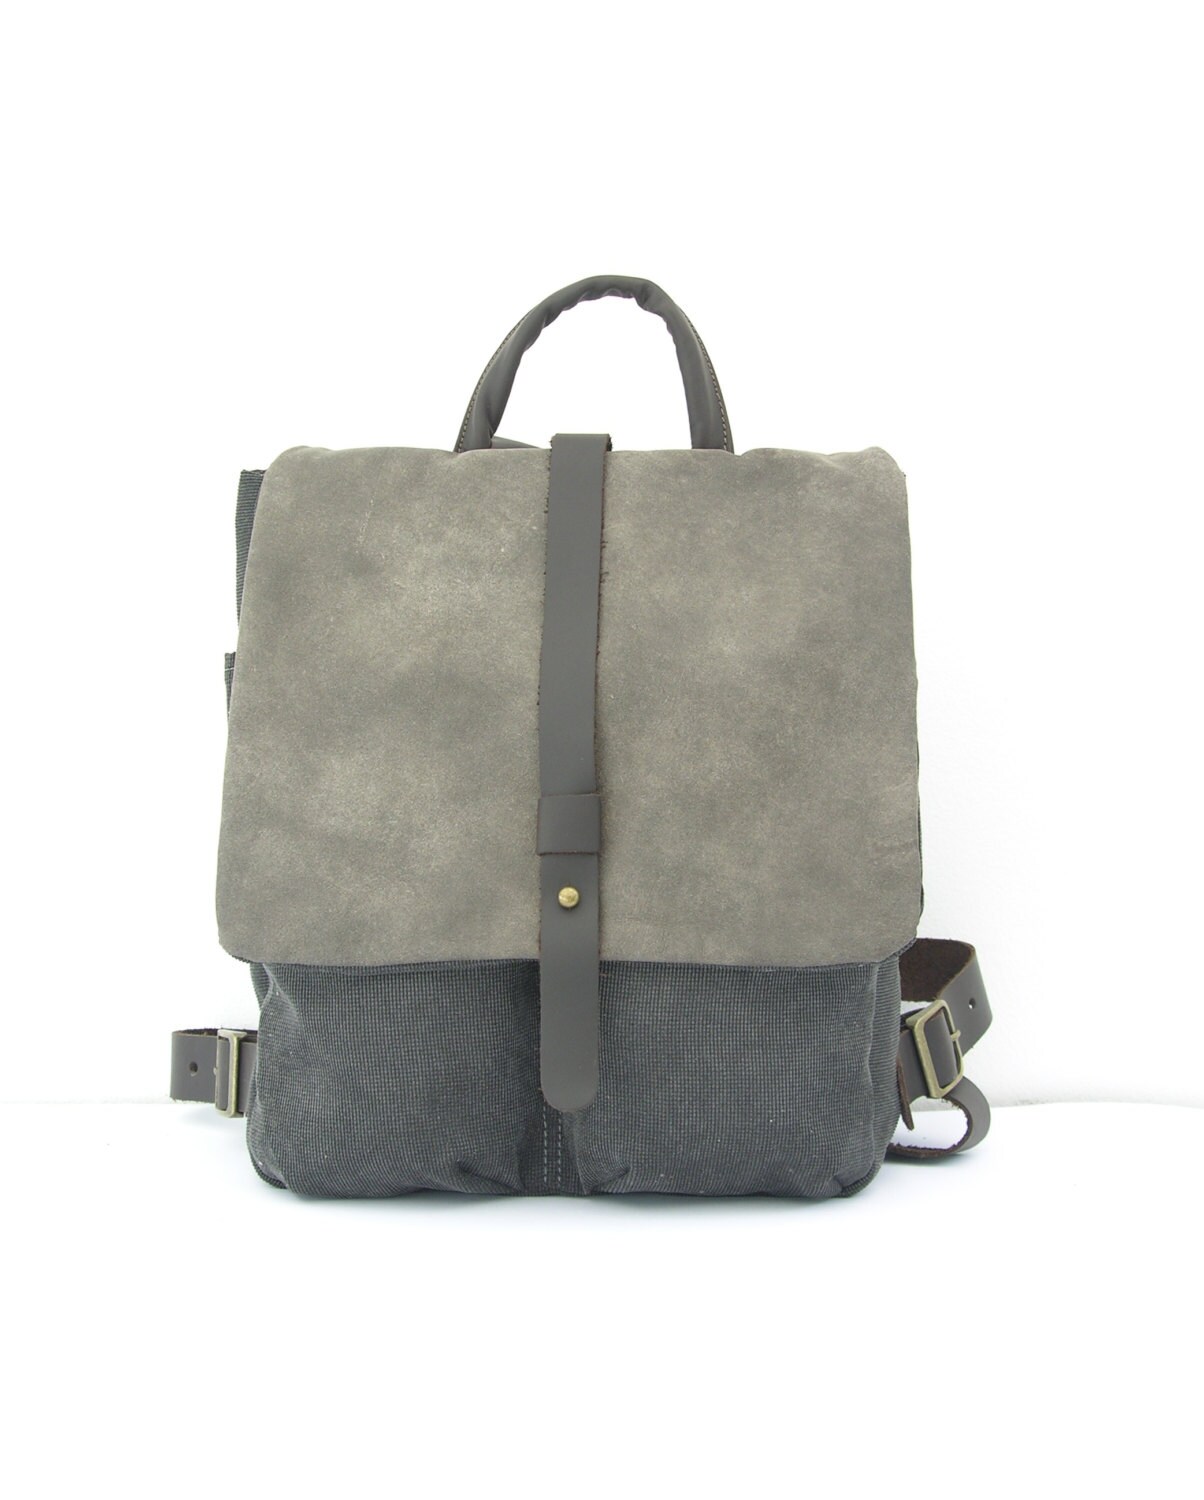 Gray Canvas Backpack Lined Bag Charcoal Bags Compartment